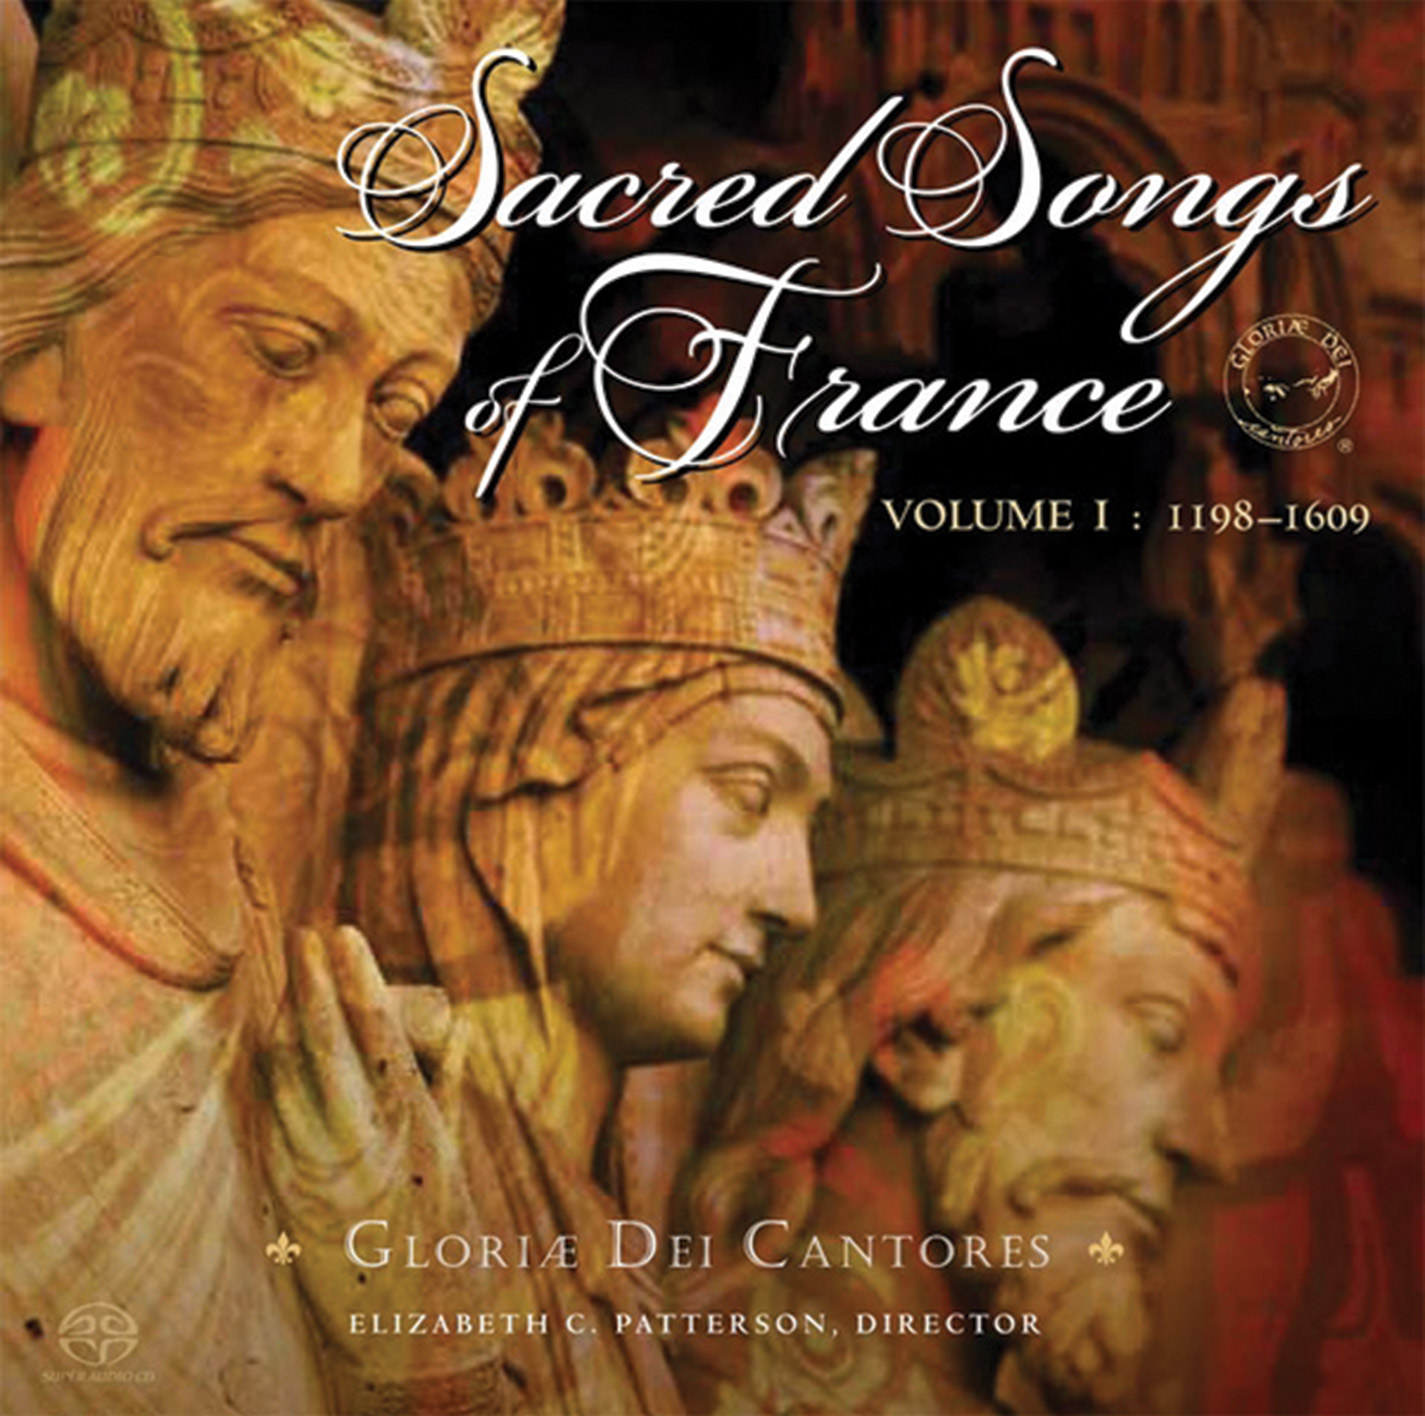 product image of 'Sacred Songs of France' Gloriae Dei Cantores choral recording